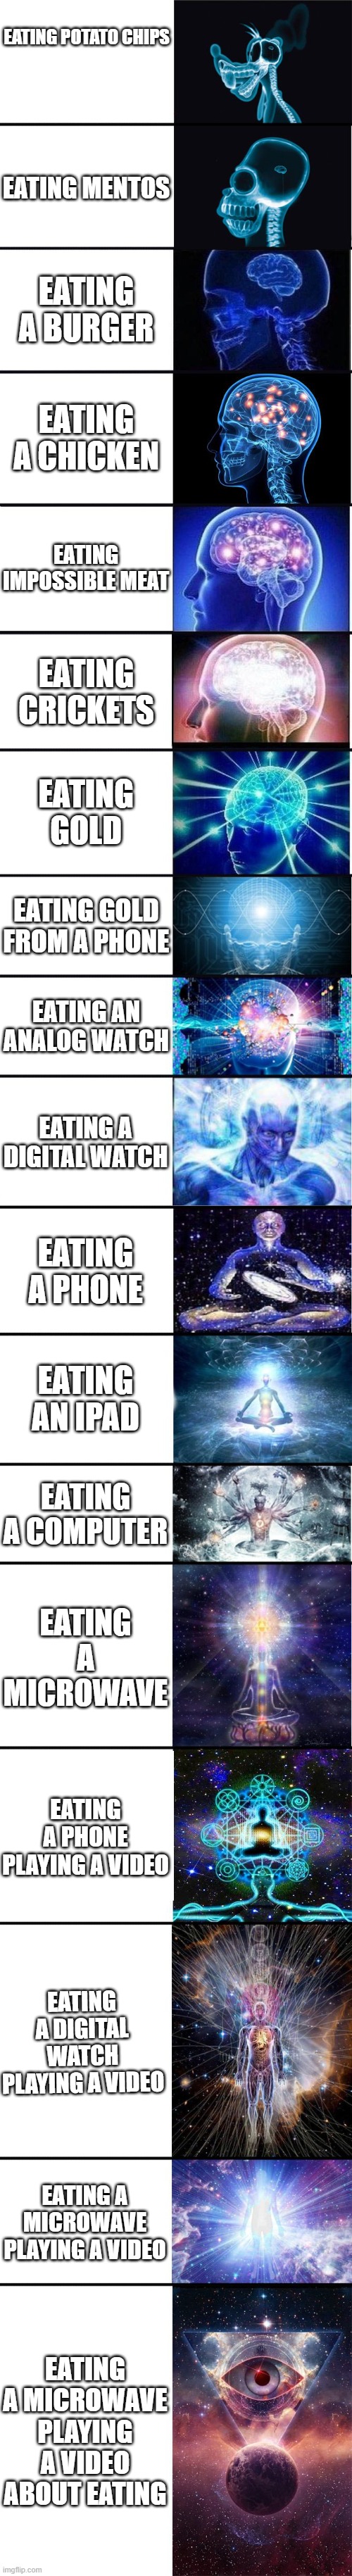 expanding brain: 9001 | EATING POTATO CHIPS; EATING MENTOS; EATING A BURGER; EATING A CHICKEN; EATING IMPOSSIBLE MEAT; EATING CRICKETS; EATING GOLD; EATING GOLD FROM A PHONE; EATING AN ANALOG WATCH; EATING A DIGITAL WATCH; EATING A PHONE; EATING AN IPAD; EATING A COMPUTER; EATING A MICROWAVE; EATING A PHONE PLAYING A VIDEO; EATING A DIGITAL WATCH PLAYING A VIDEO; EATING A MICROWAVE PLAYING A VIDEO; EATING A MICROWAVE PLAYING A VIDEO ABOUT EATING | image tagged in expanding brain 9001 | made w/ Imgflip meme maker